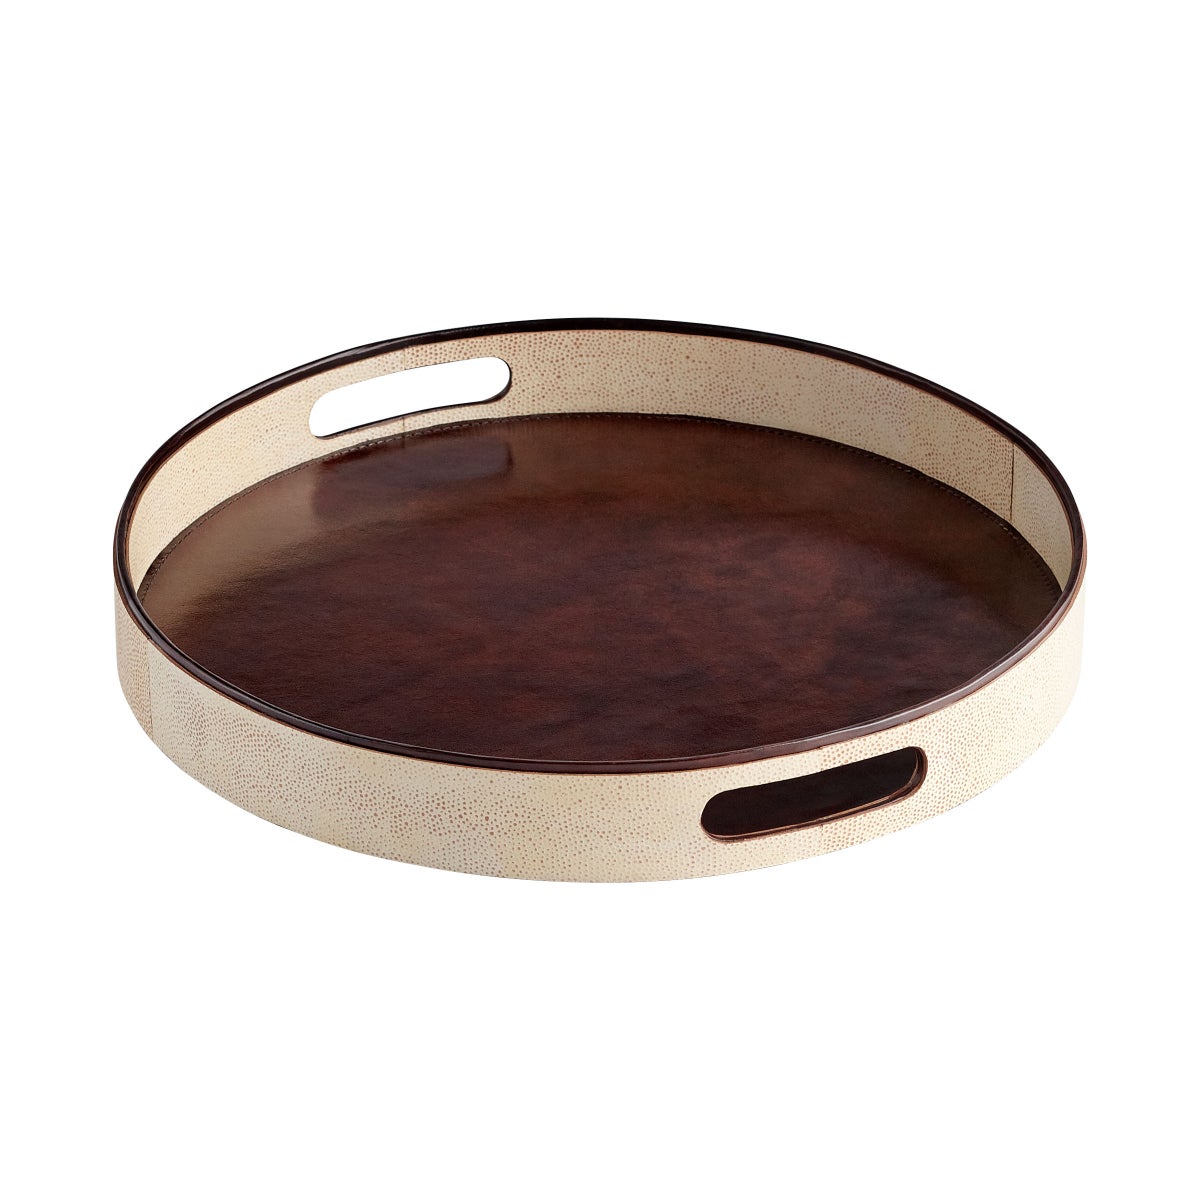 Marriot Tray | Beige And Brown - Large